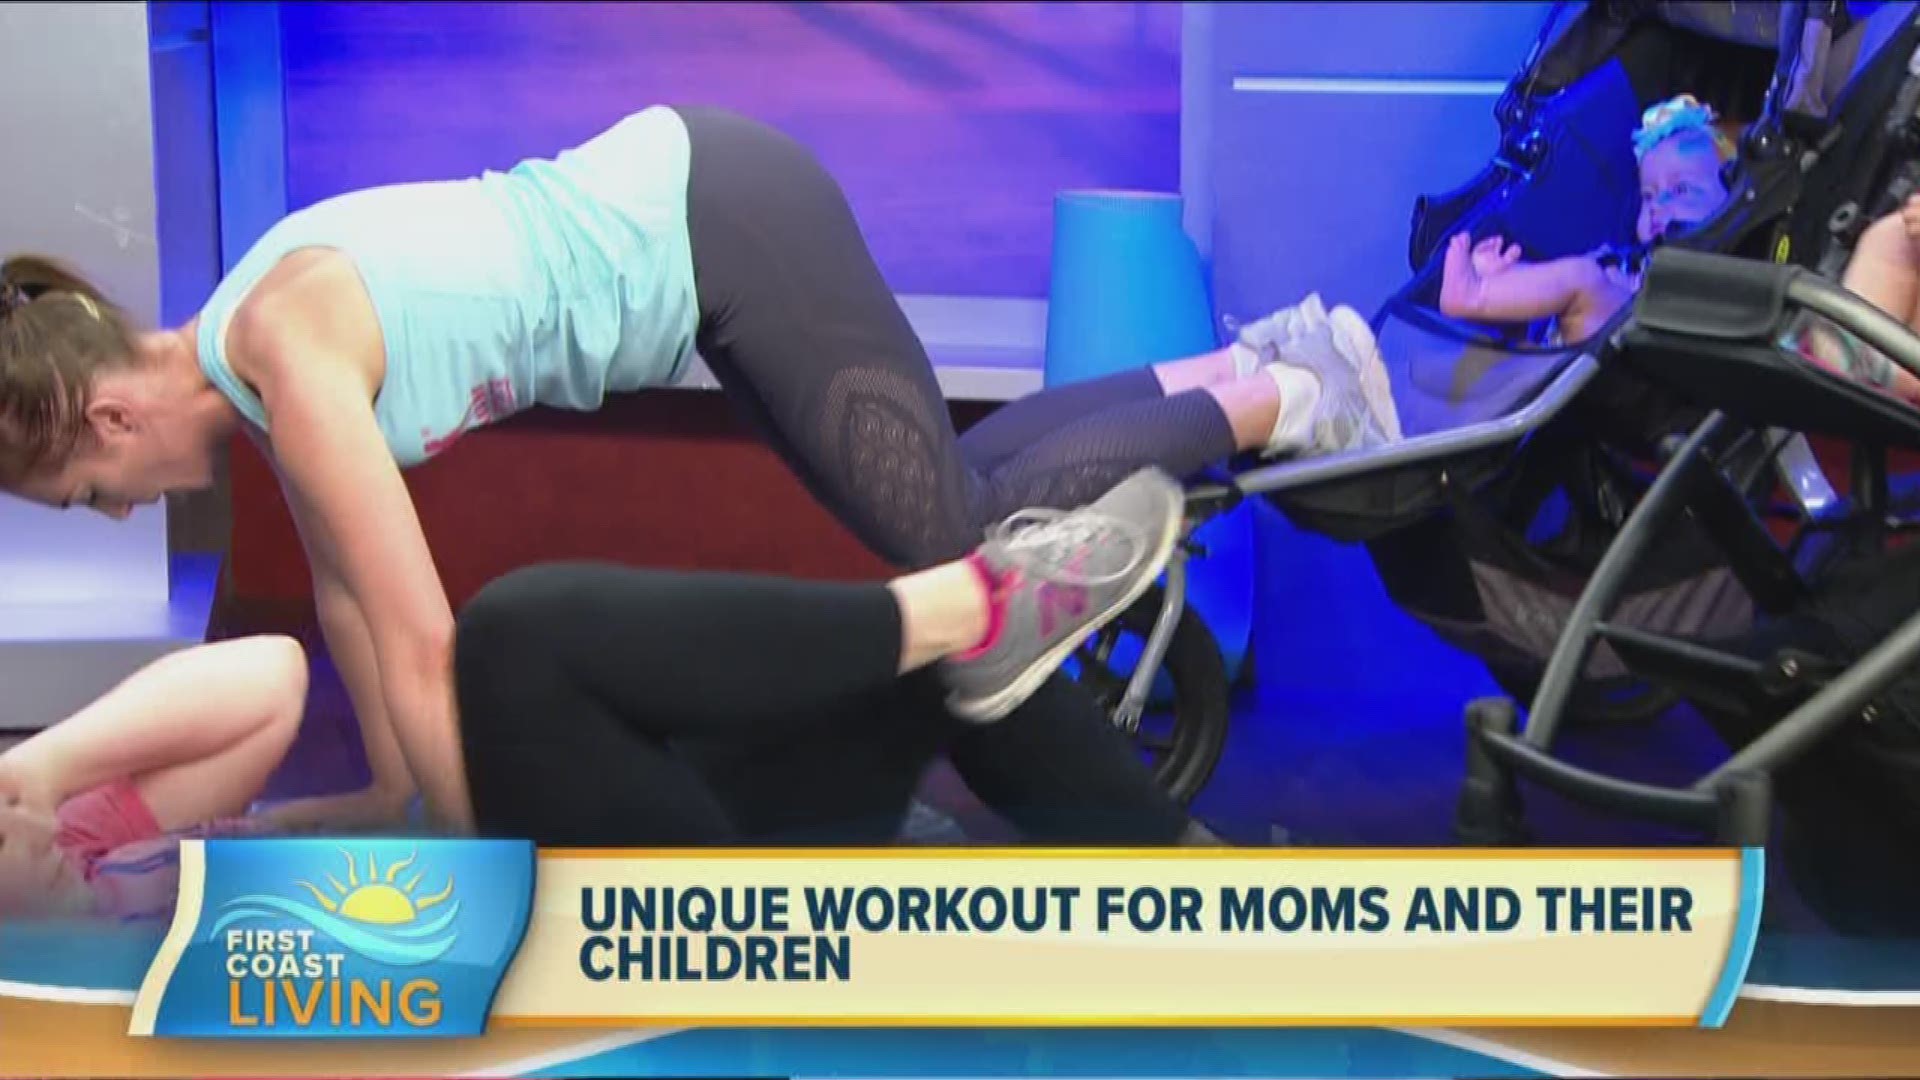 A fun and creative full body workout for moms and expecting moms.